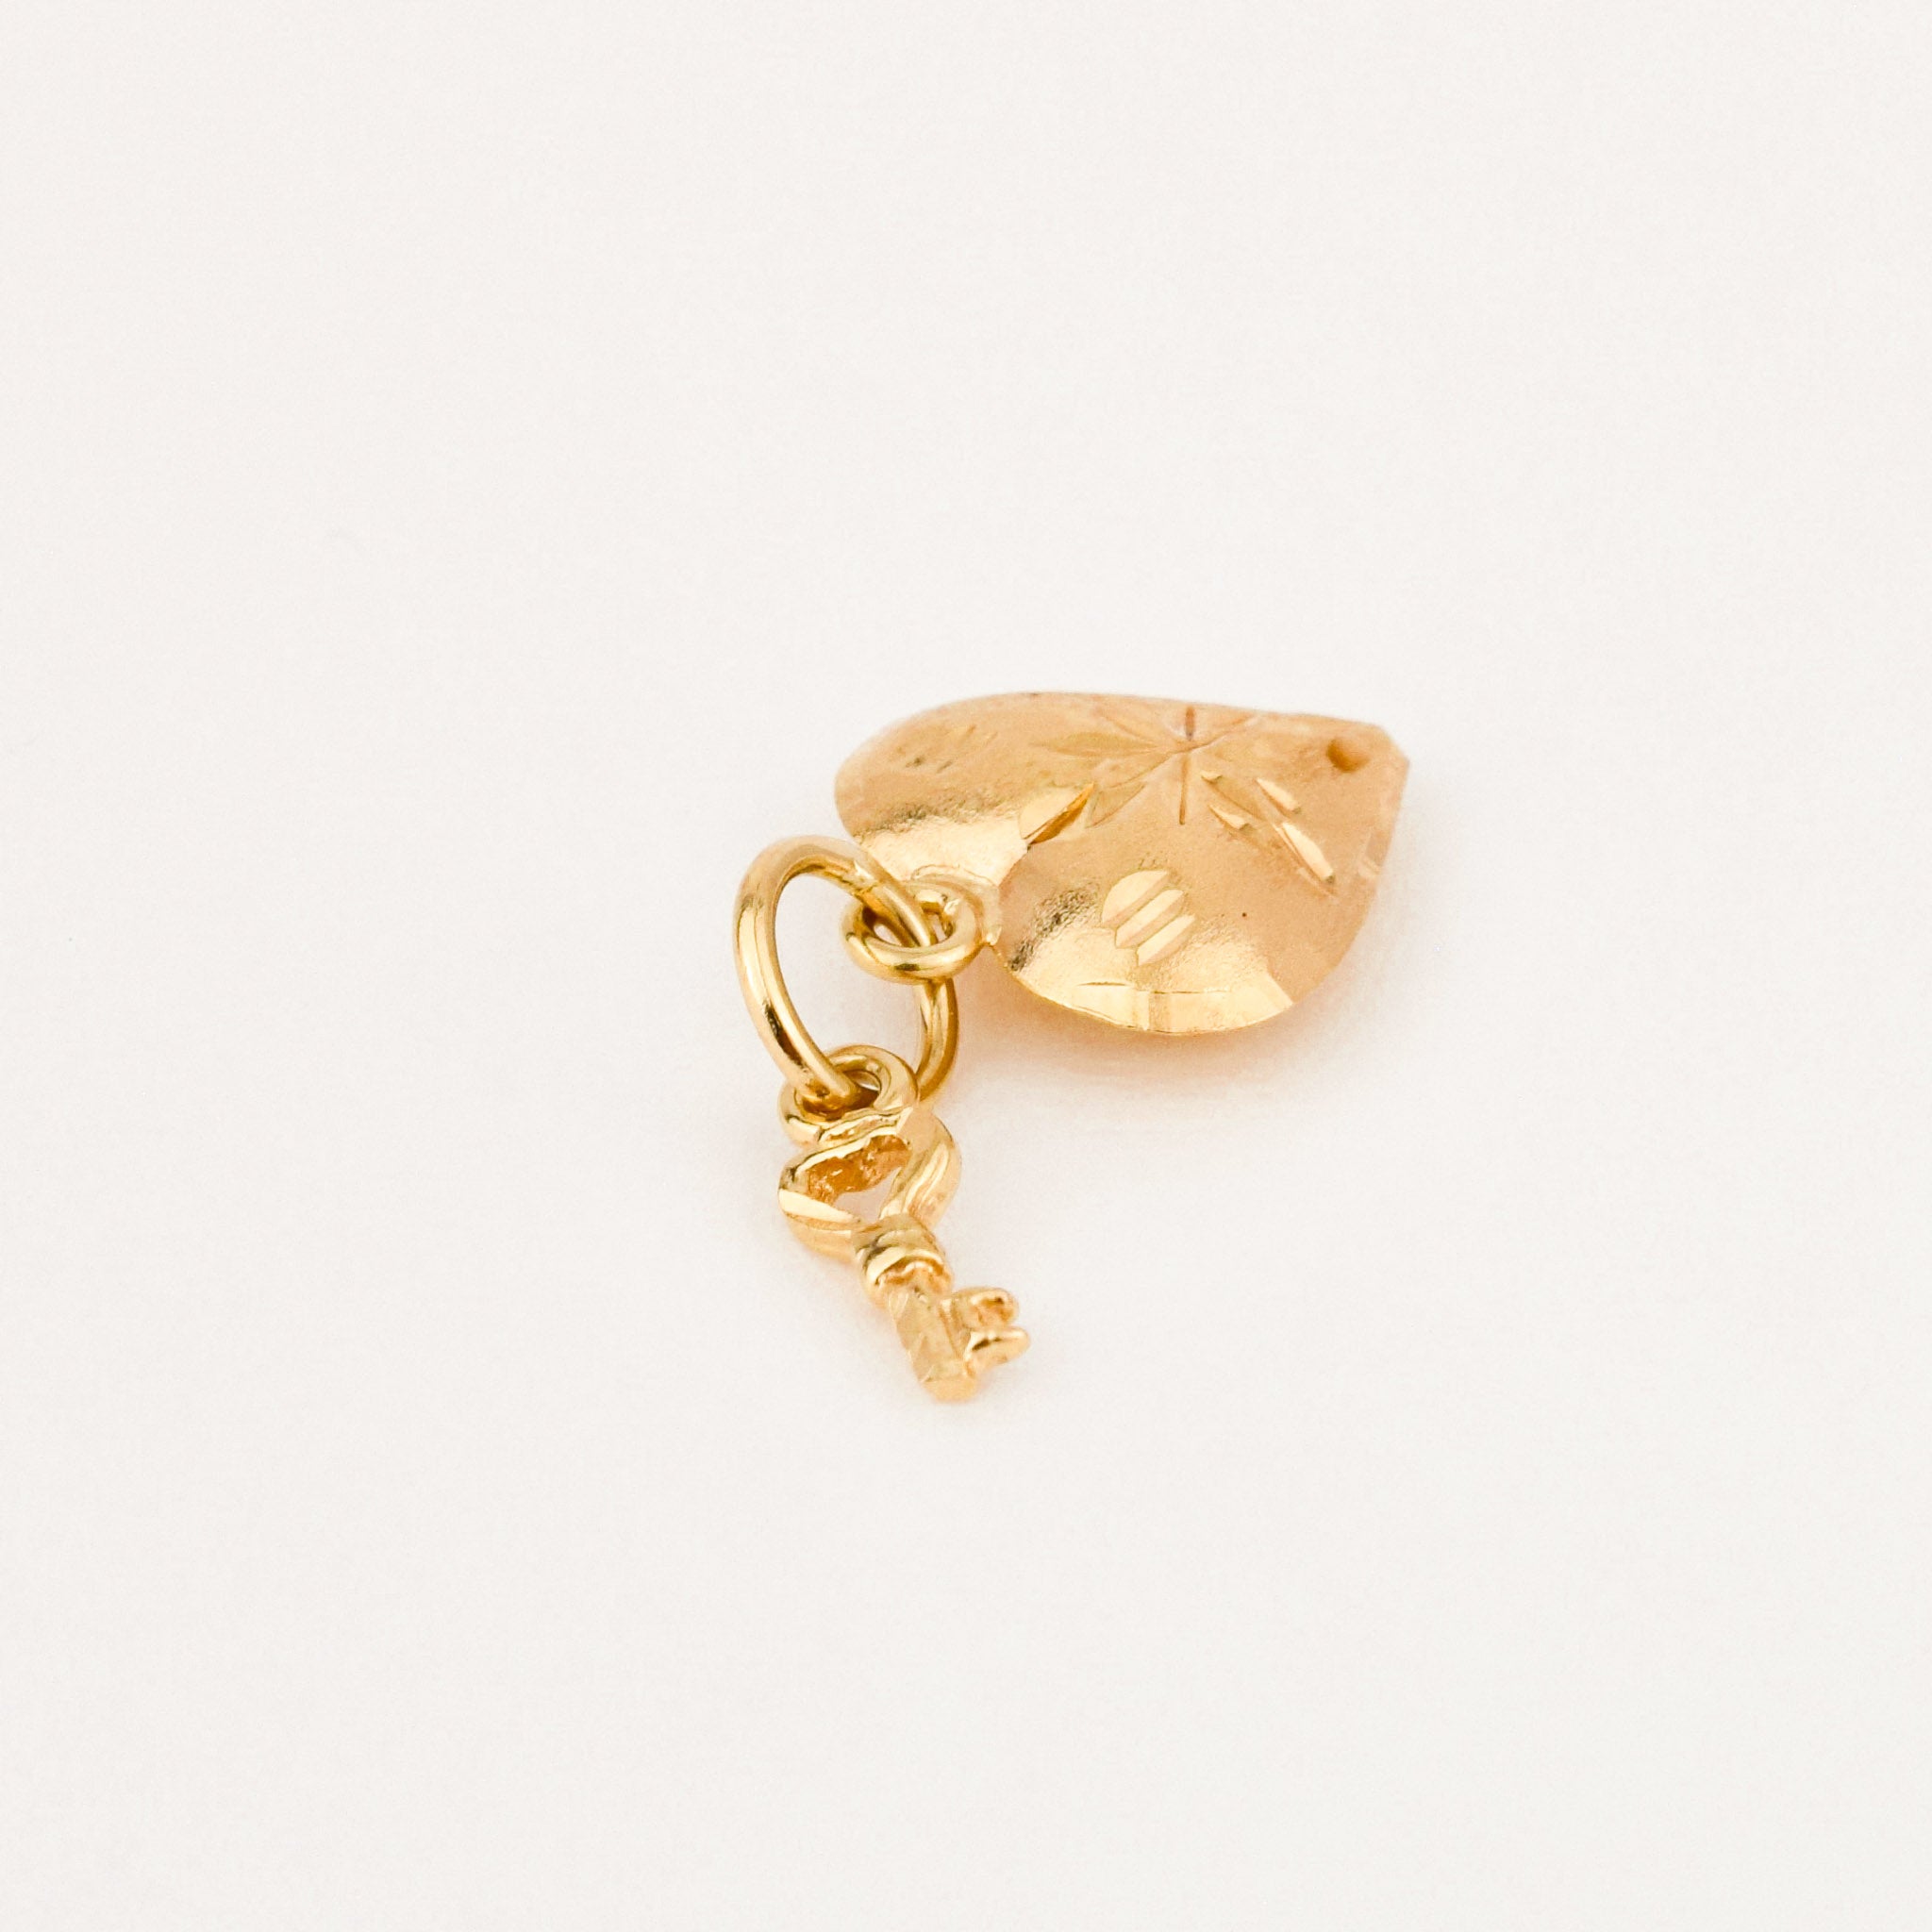 vintage gold heart and key charm pendant 